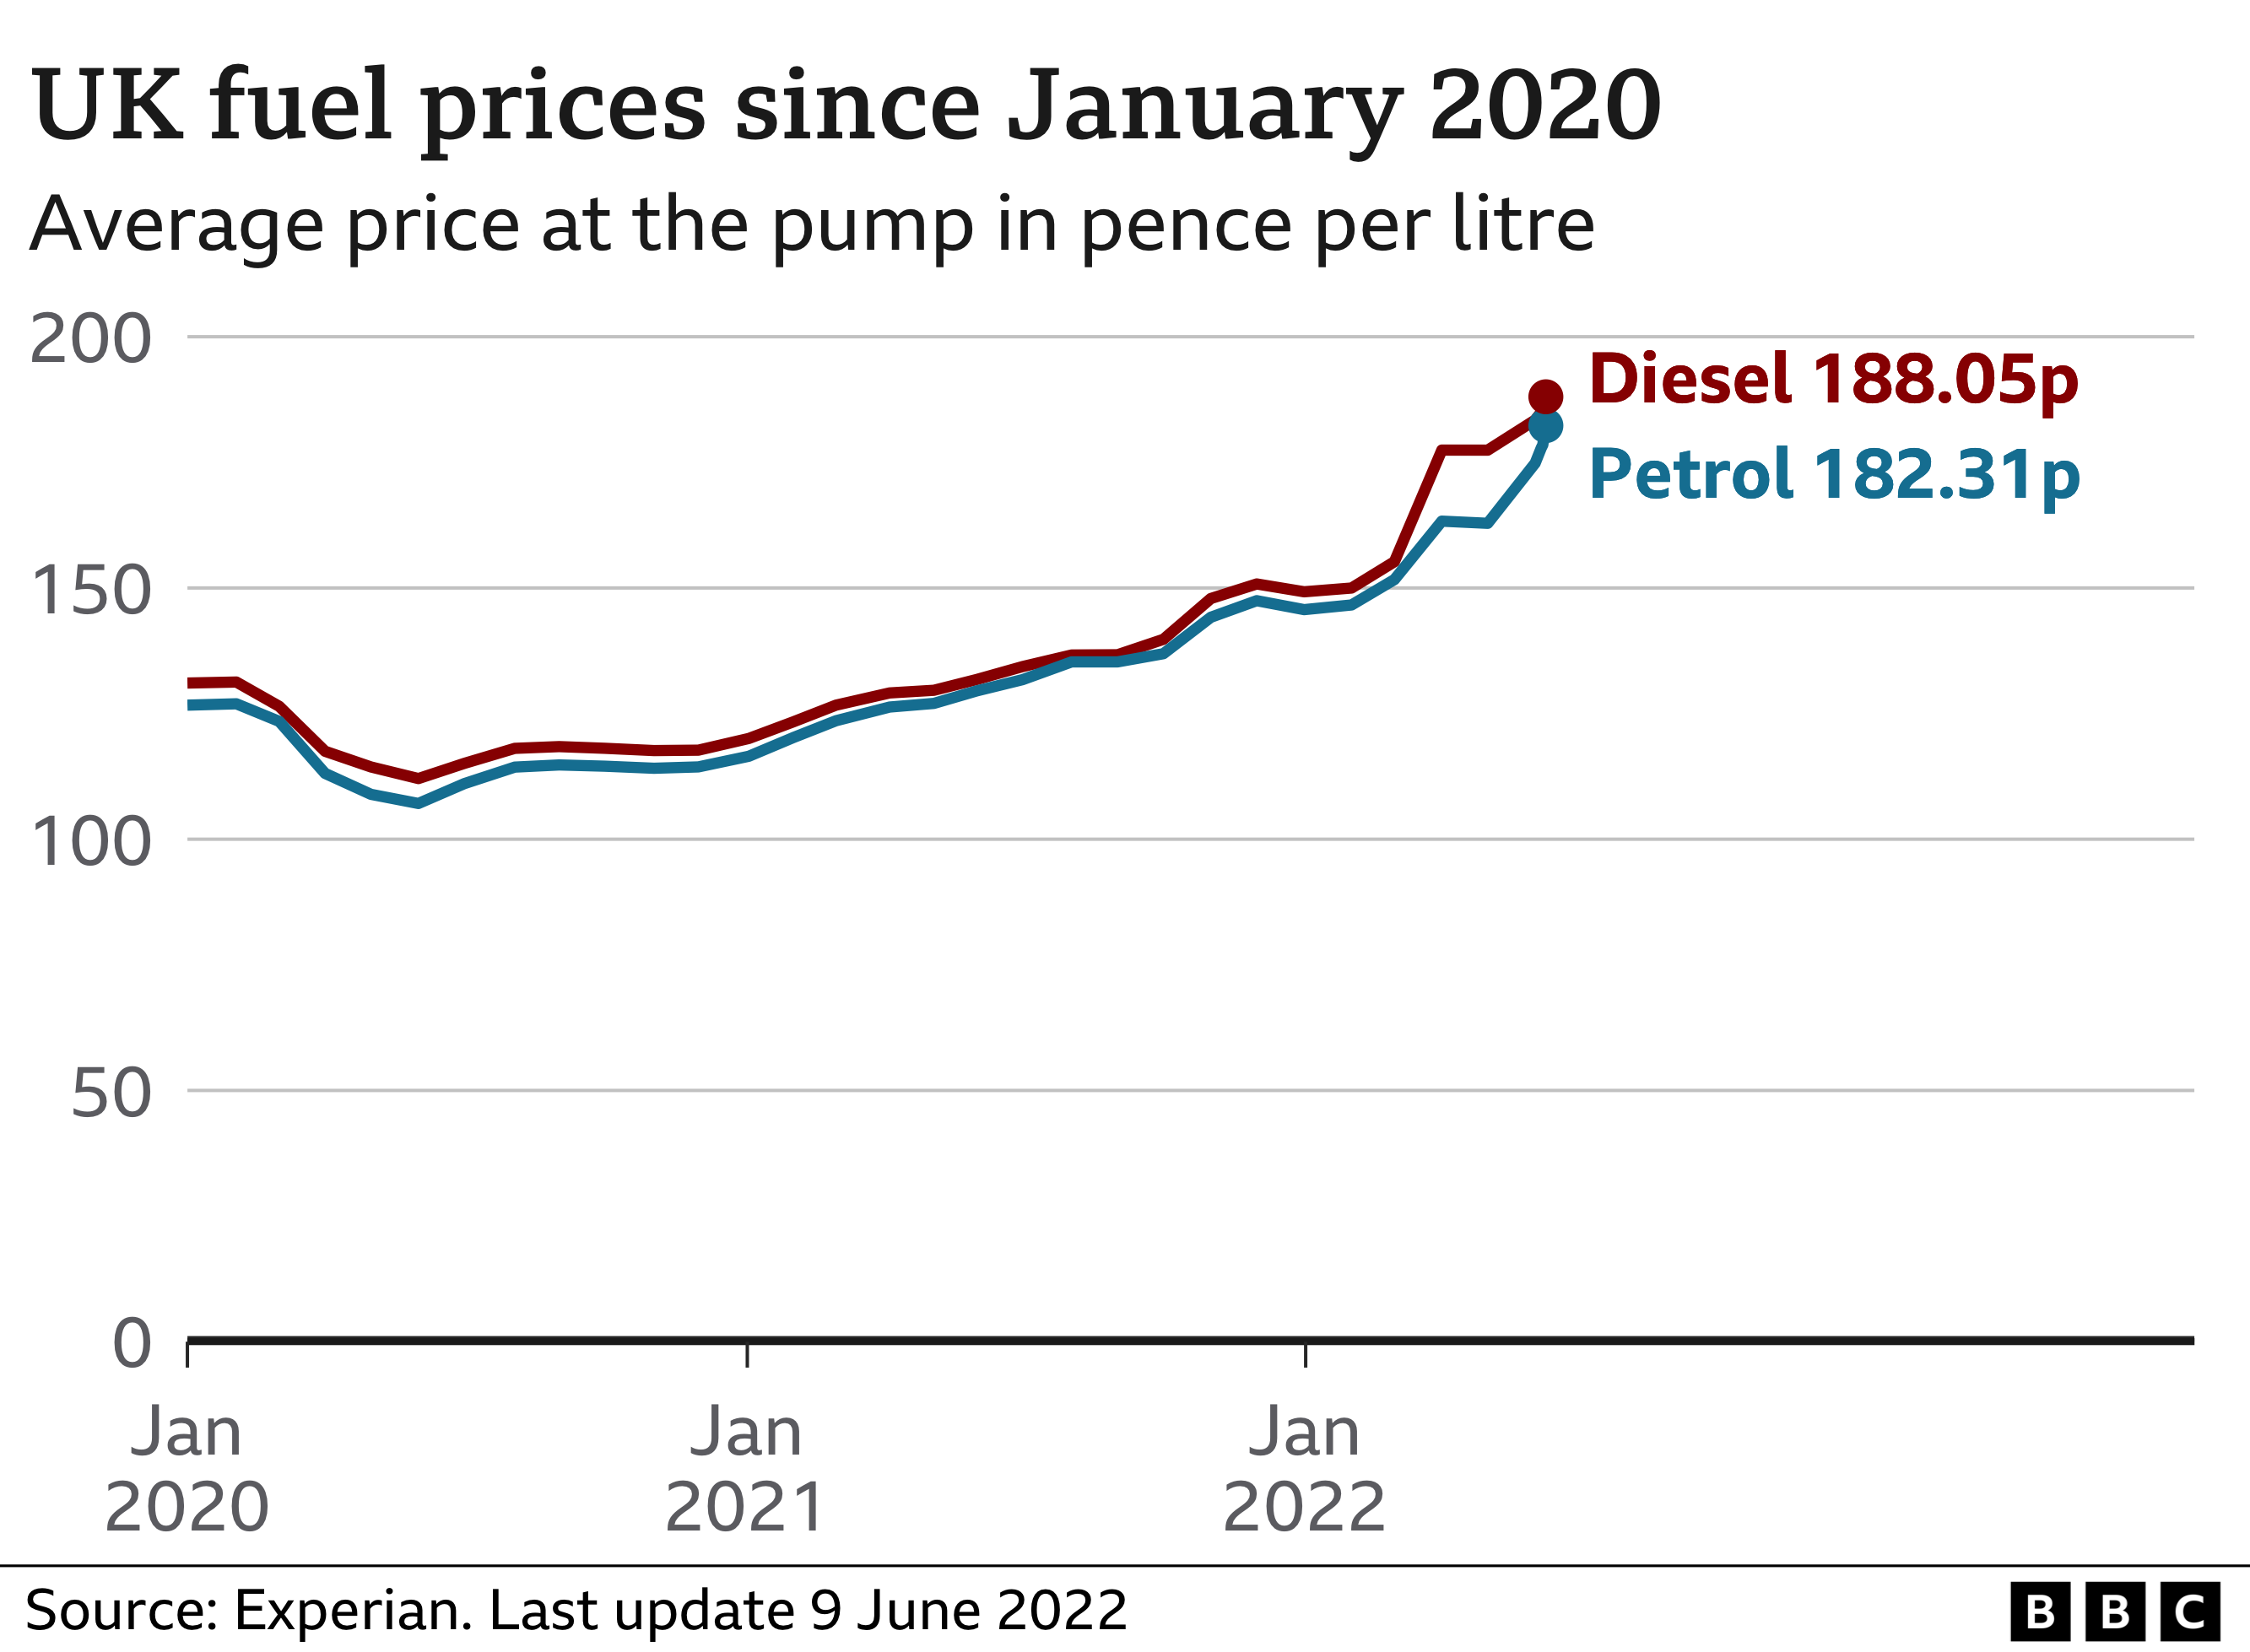 Graphic showing UK fuel prices since January 2020